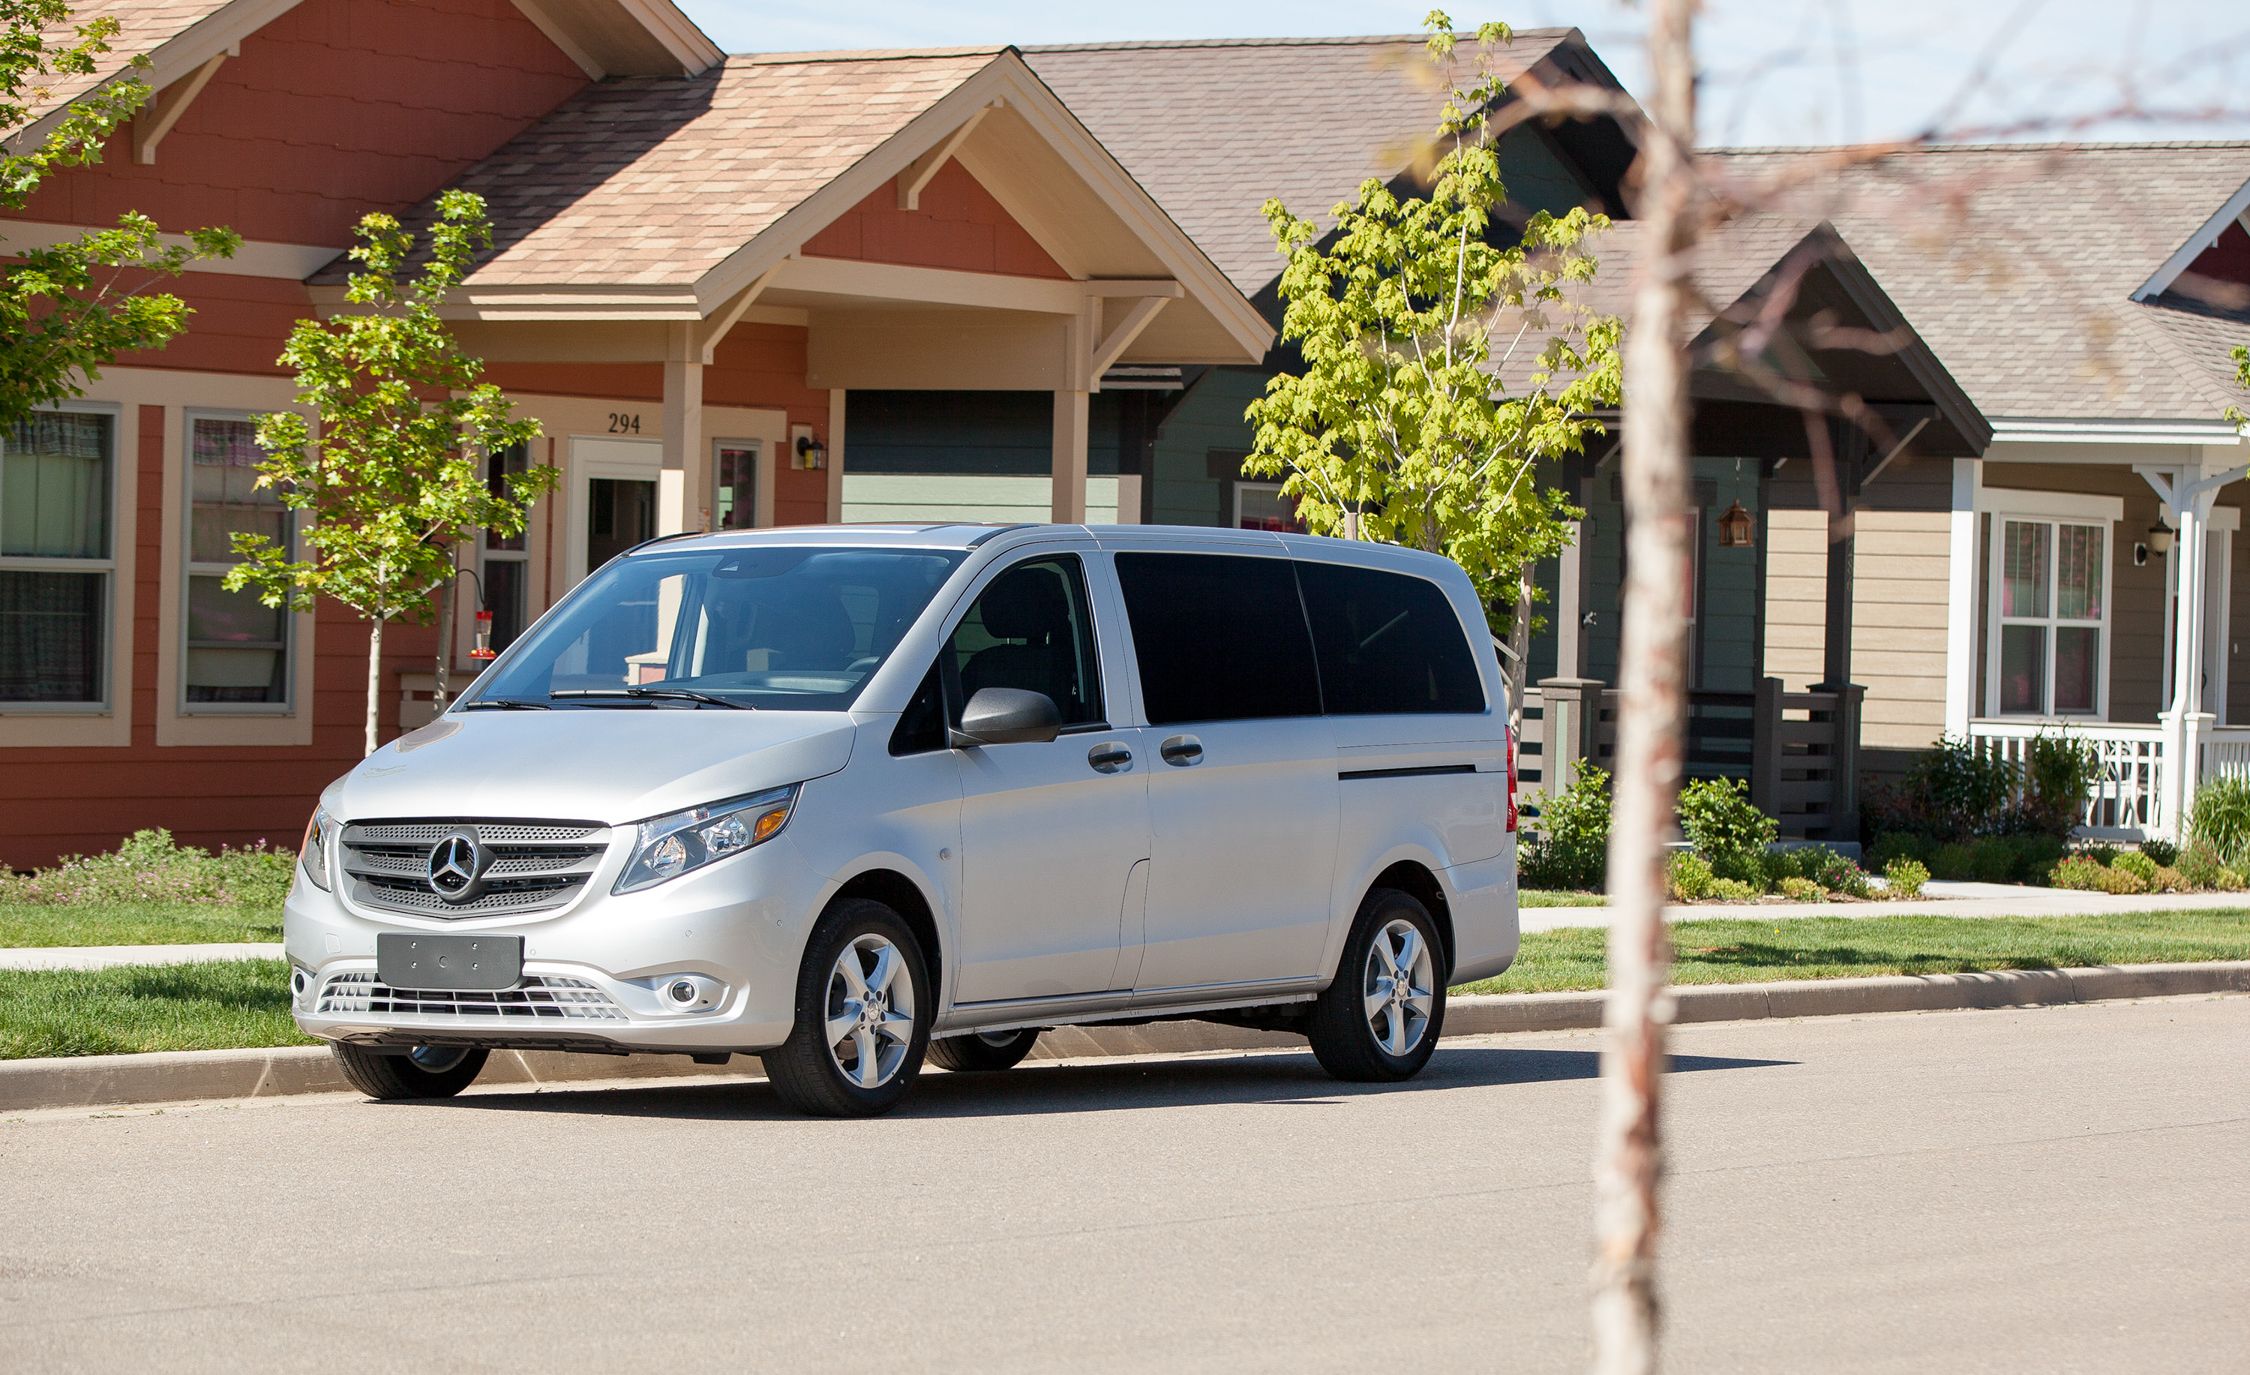 New look Mercedes-Benz Vito available in front, rear and all-wheel drive